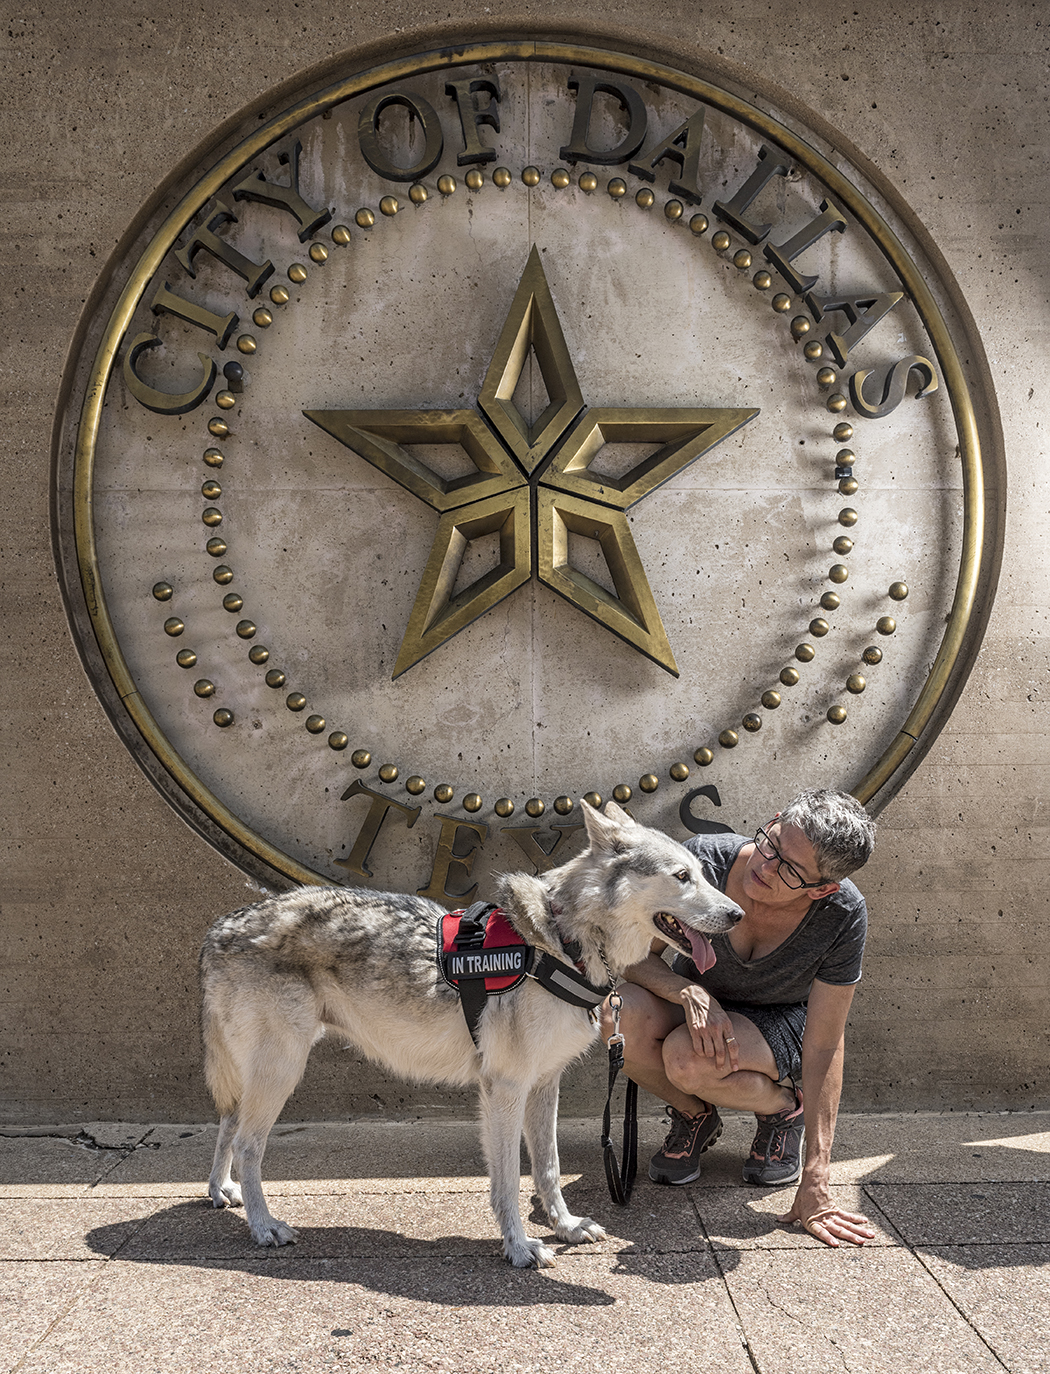 Fran Gaconnier and her dog in front of City of Dallas sign.